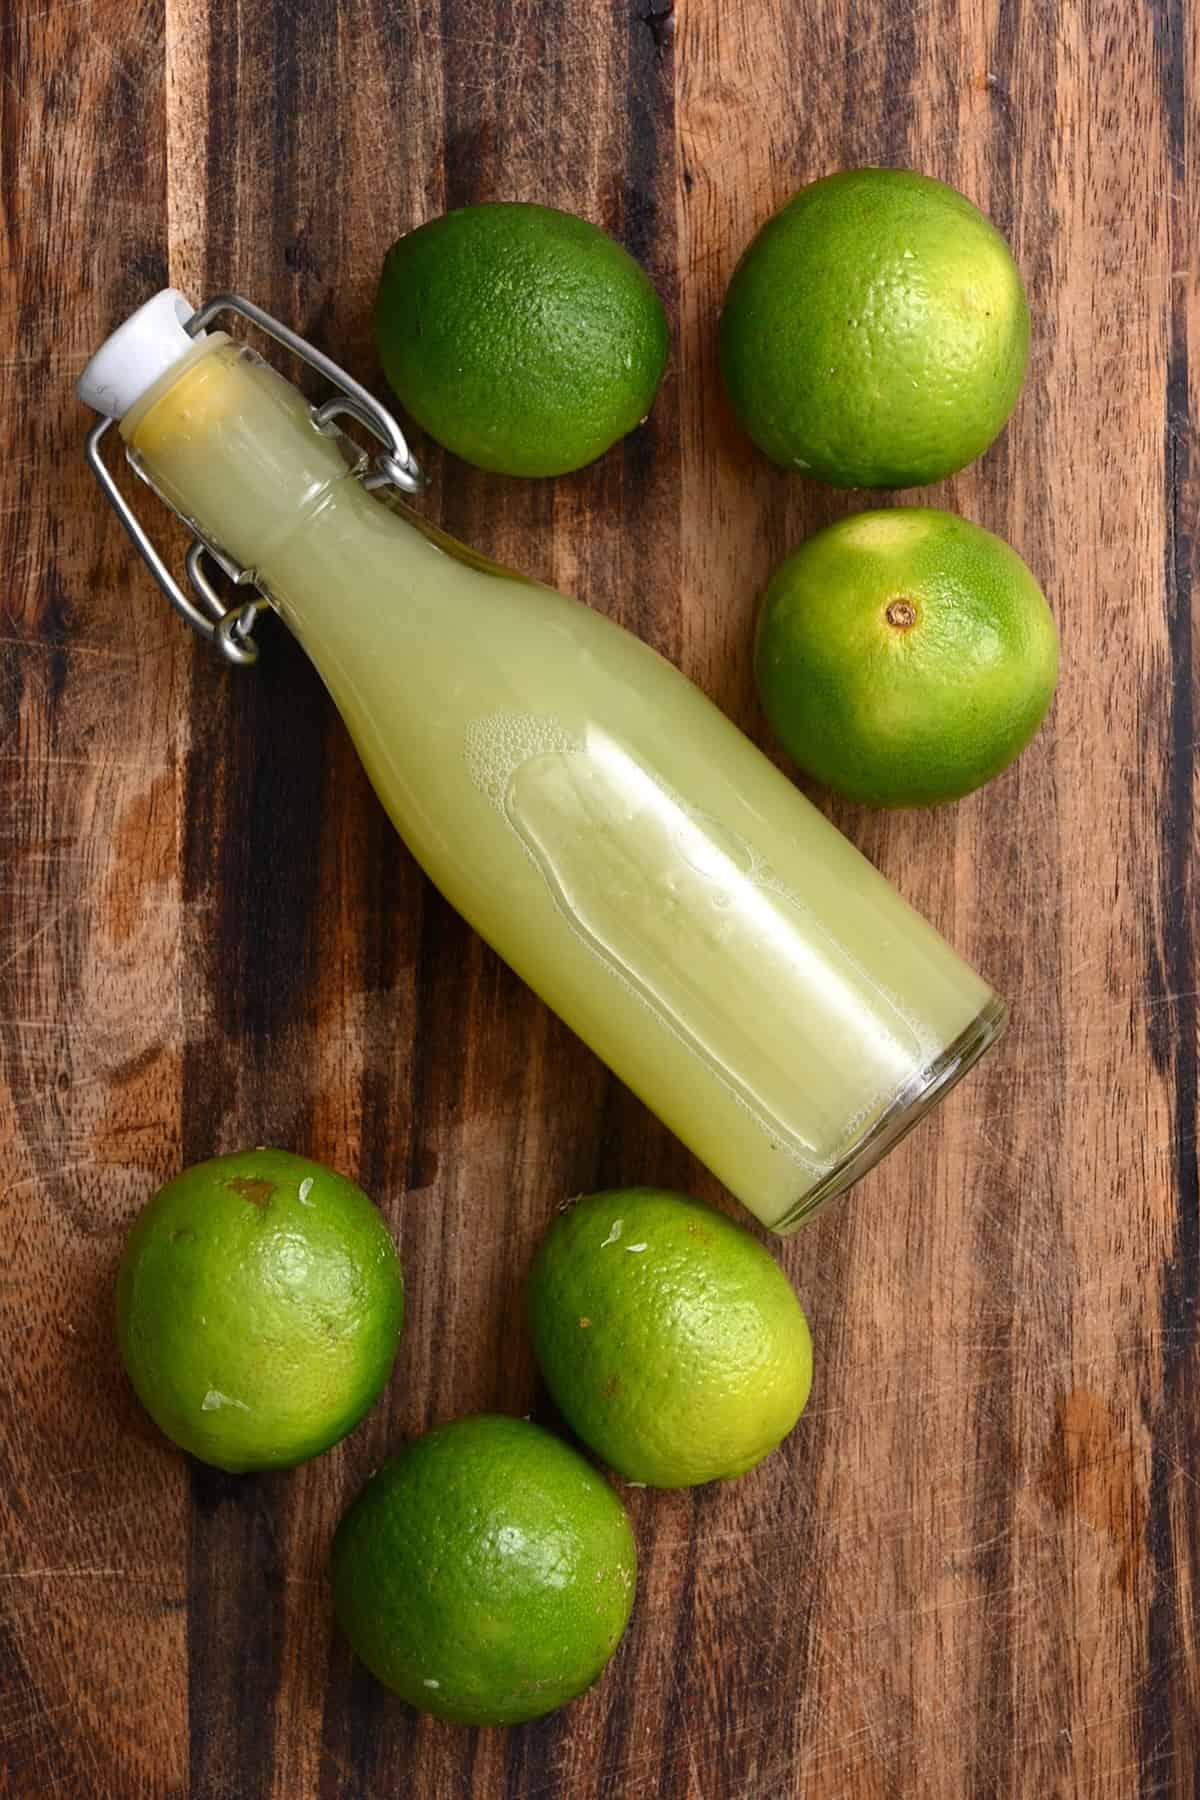 https://www.alphafoodie.com/wp-content/uploads/2022/03/How-to-Make-Lime-Juice-Main1.jpeg